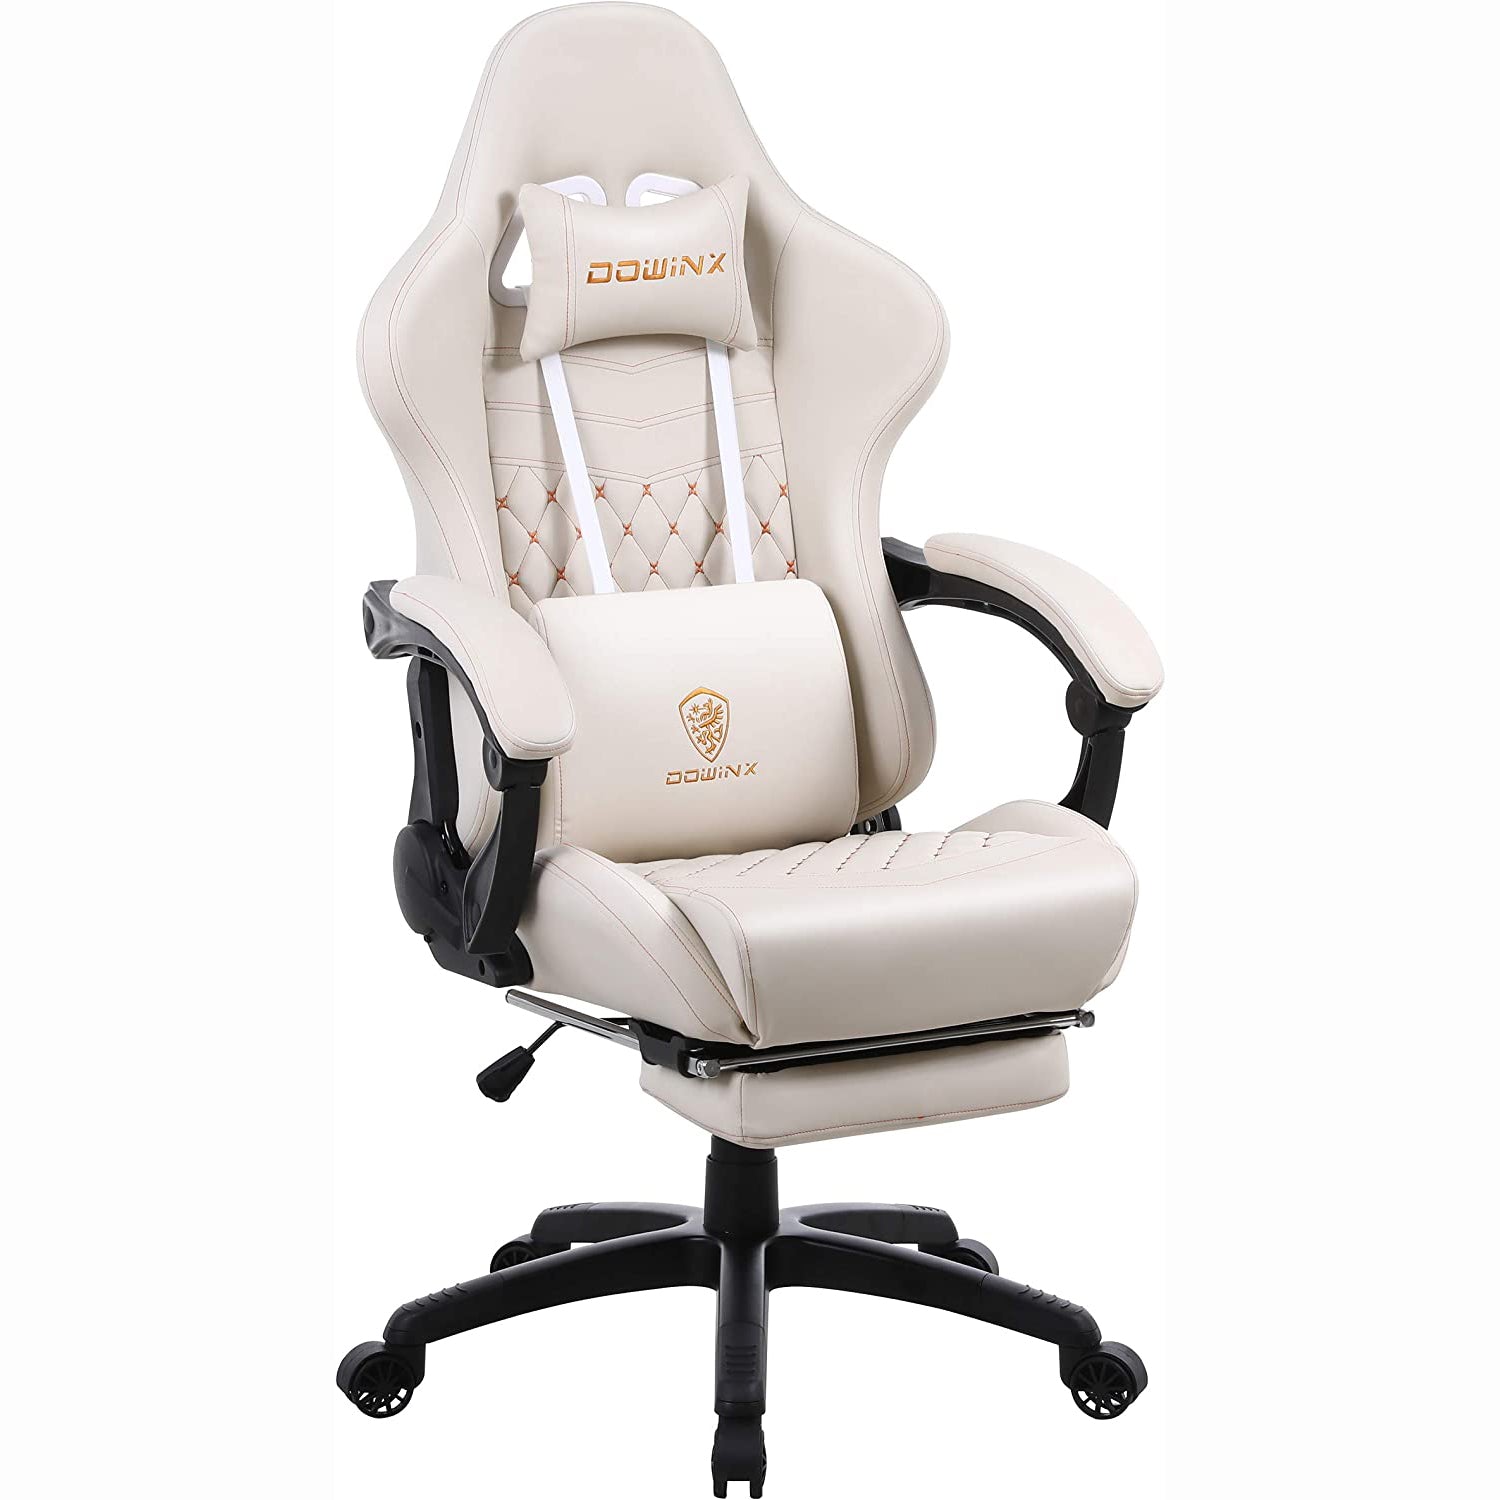 Dowinx 6689 Gaming Office Chair Ergonomic Racing Style-White(Ivory